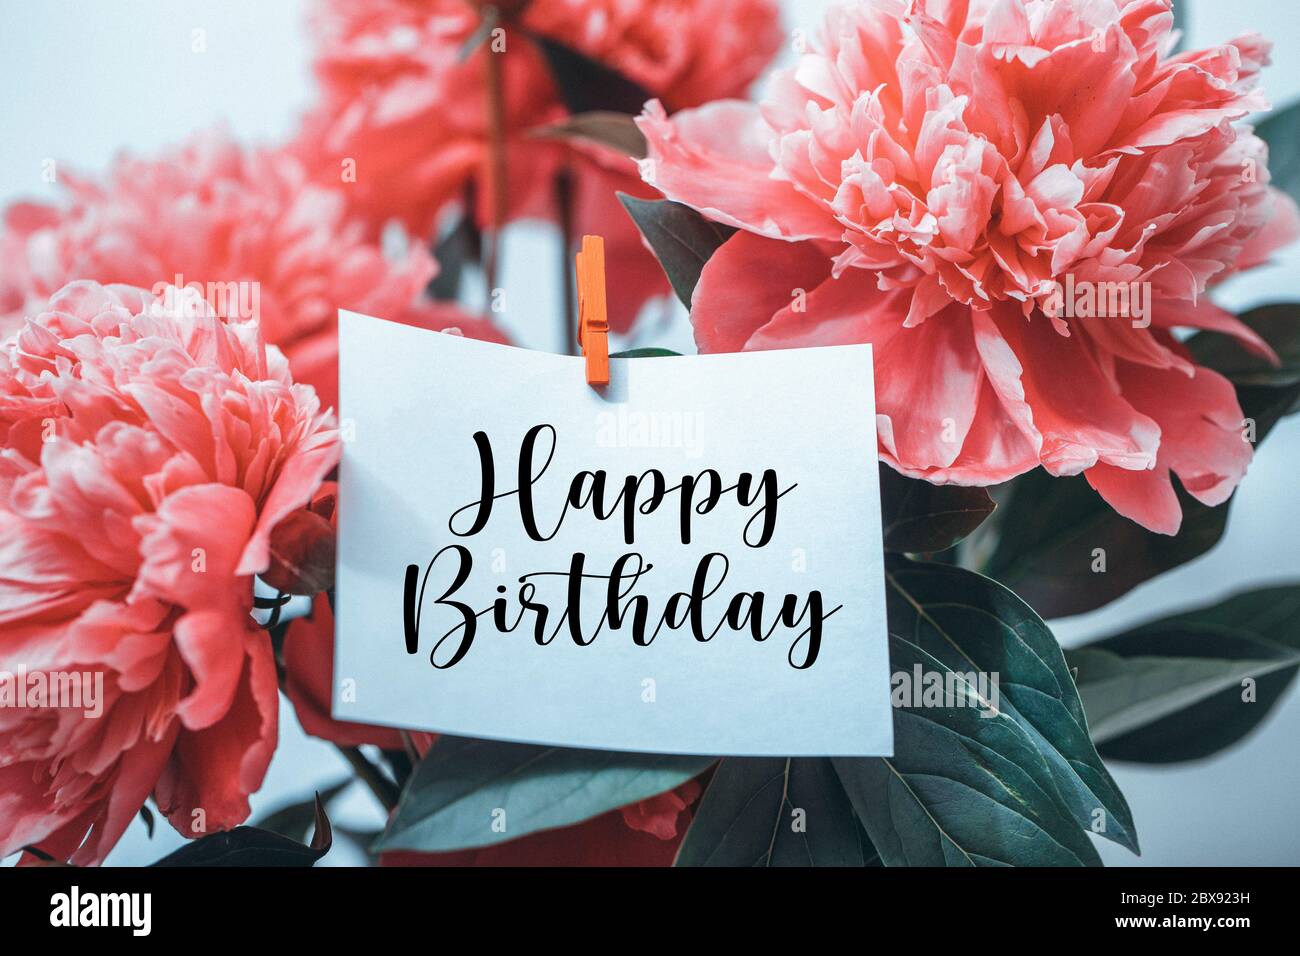 Happy Birthday greeting card on pink flower. Roses flowers and ...